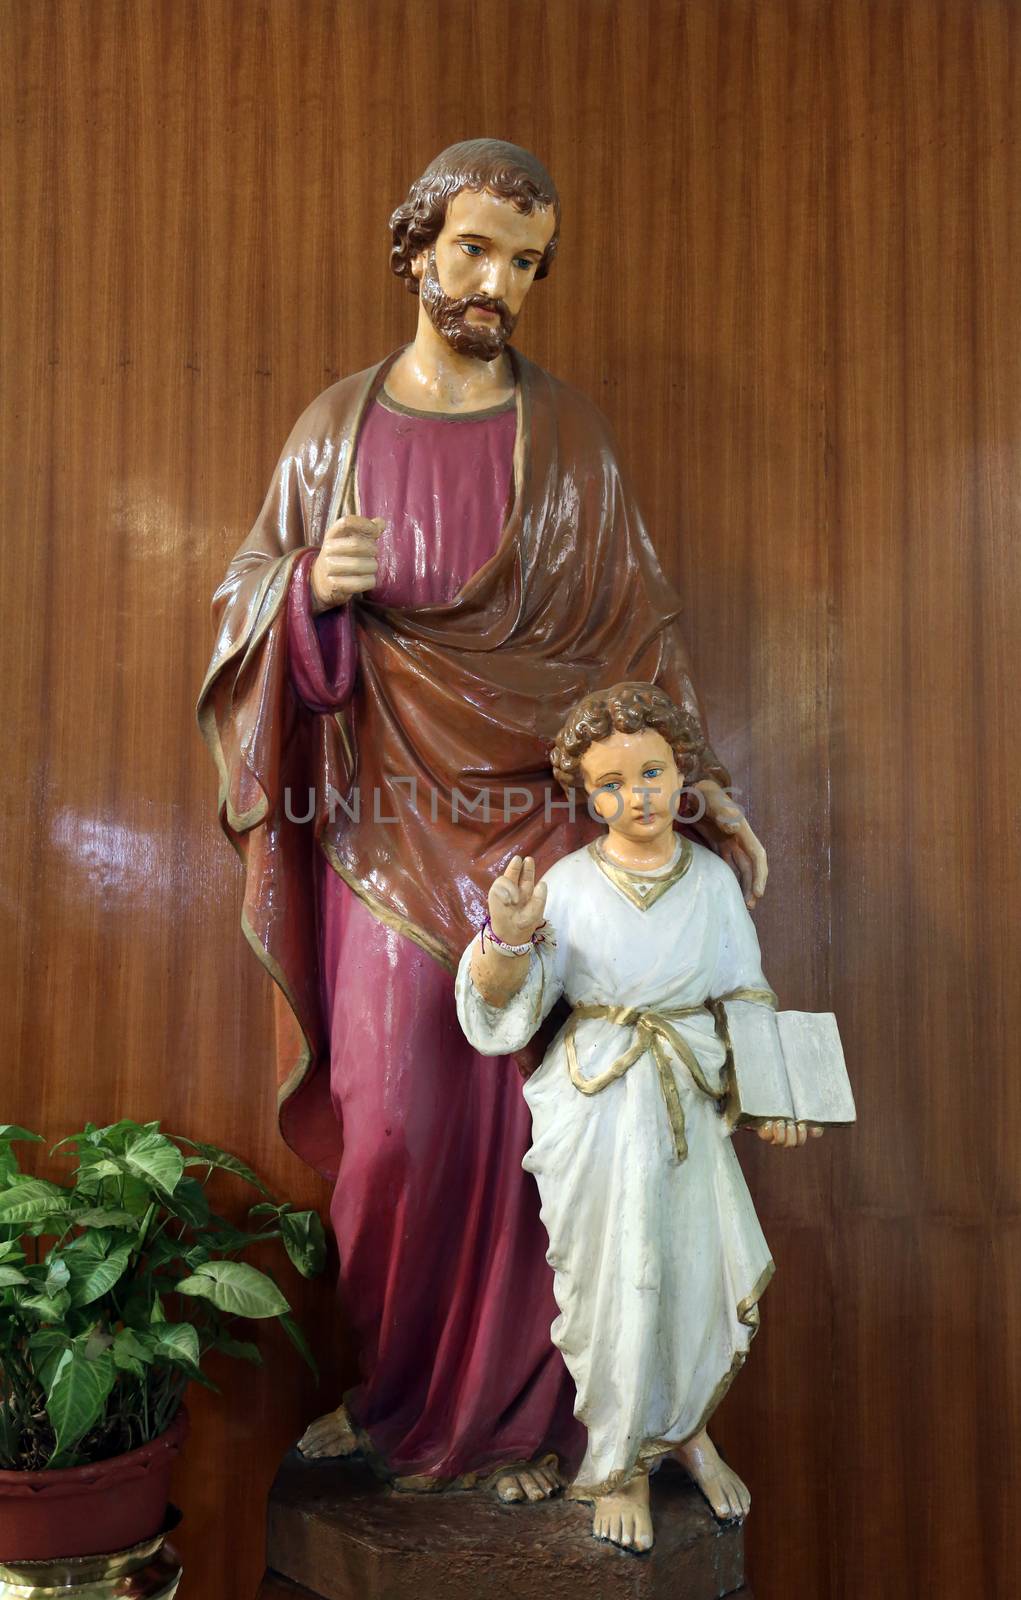 Saint Joseph with child Jesus, Church in Loreto Convent where Mother Teresa lived before the founding of the Missionaries of Charity in Kolkata, India